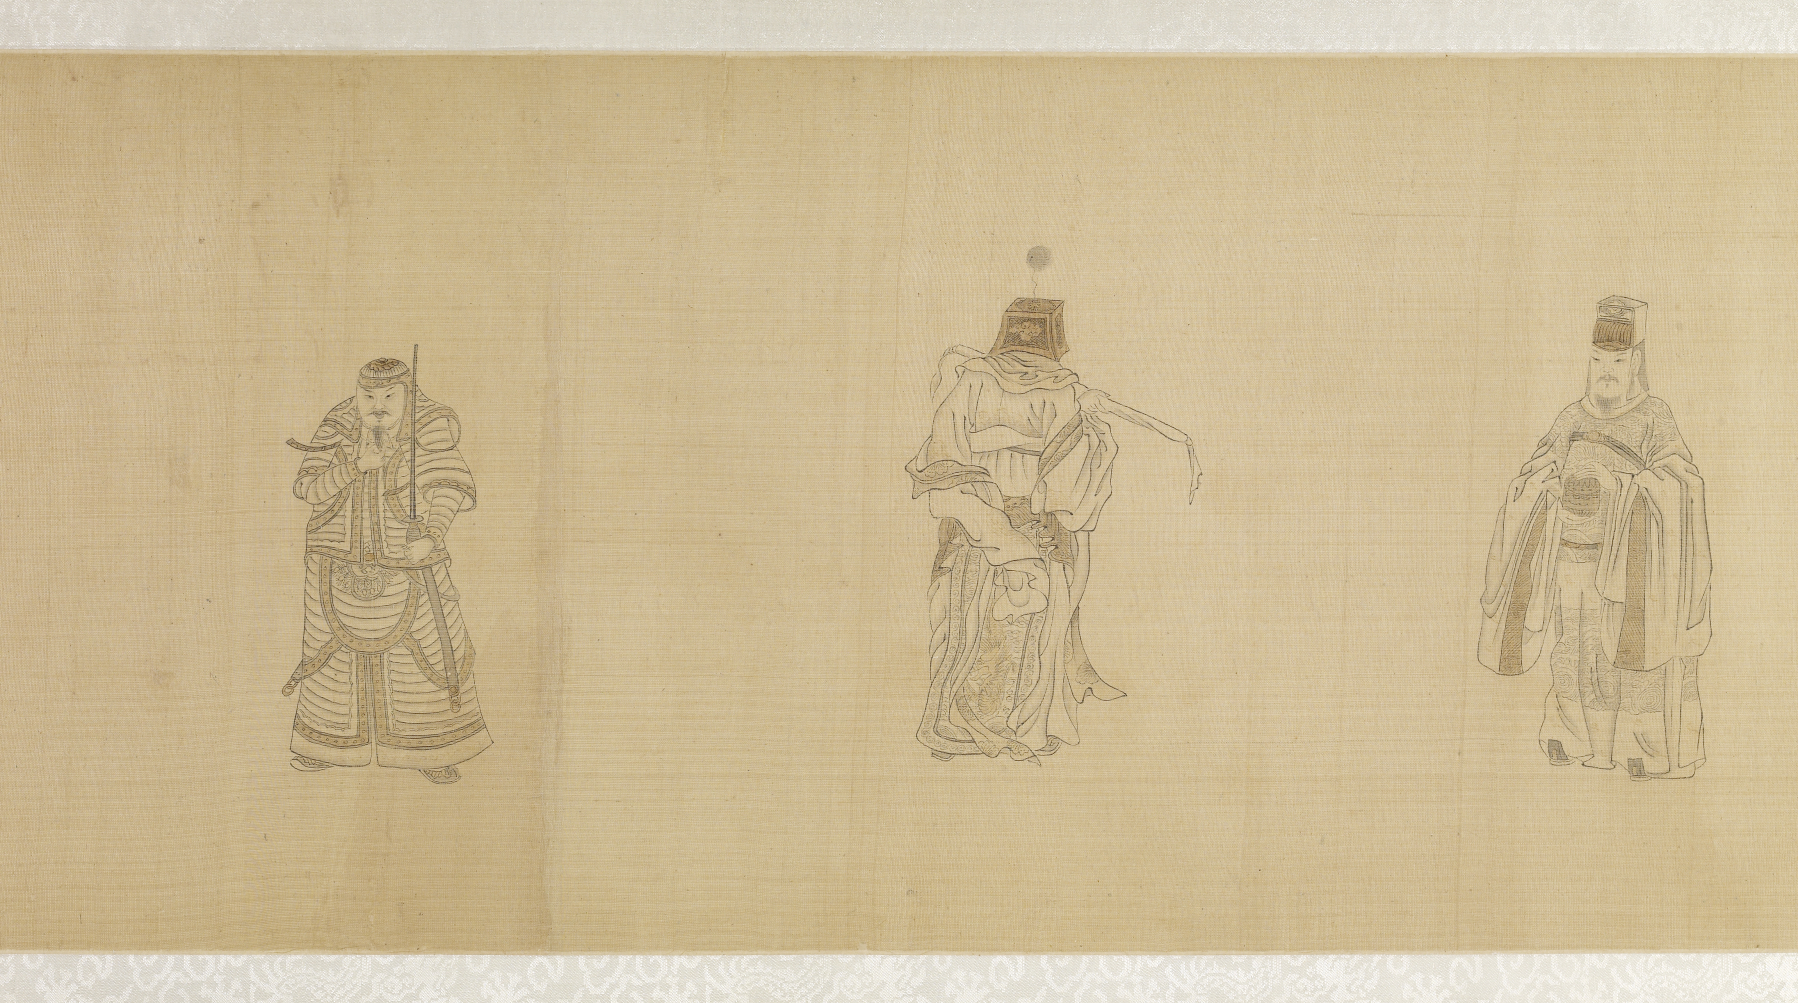 Image for The Twenty-Four Ministers of the Tang [T'ang] Dynasty Emperor Taizong [T'ai-Tsung]